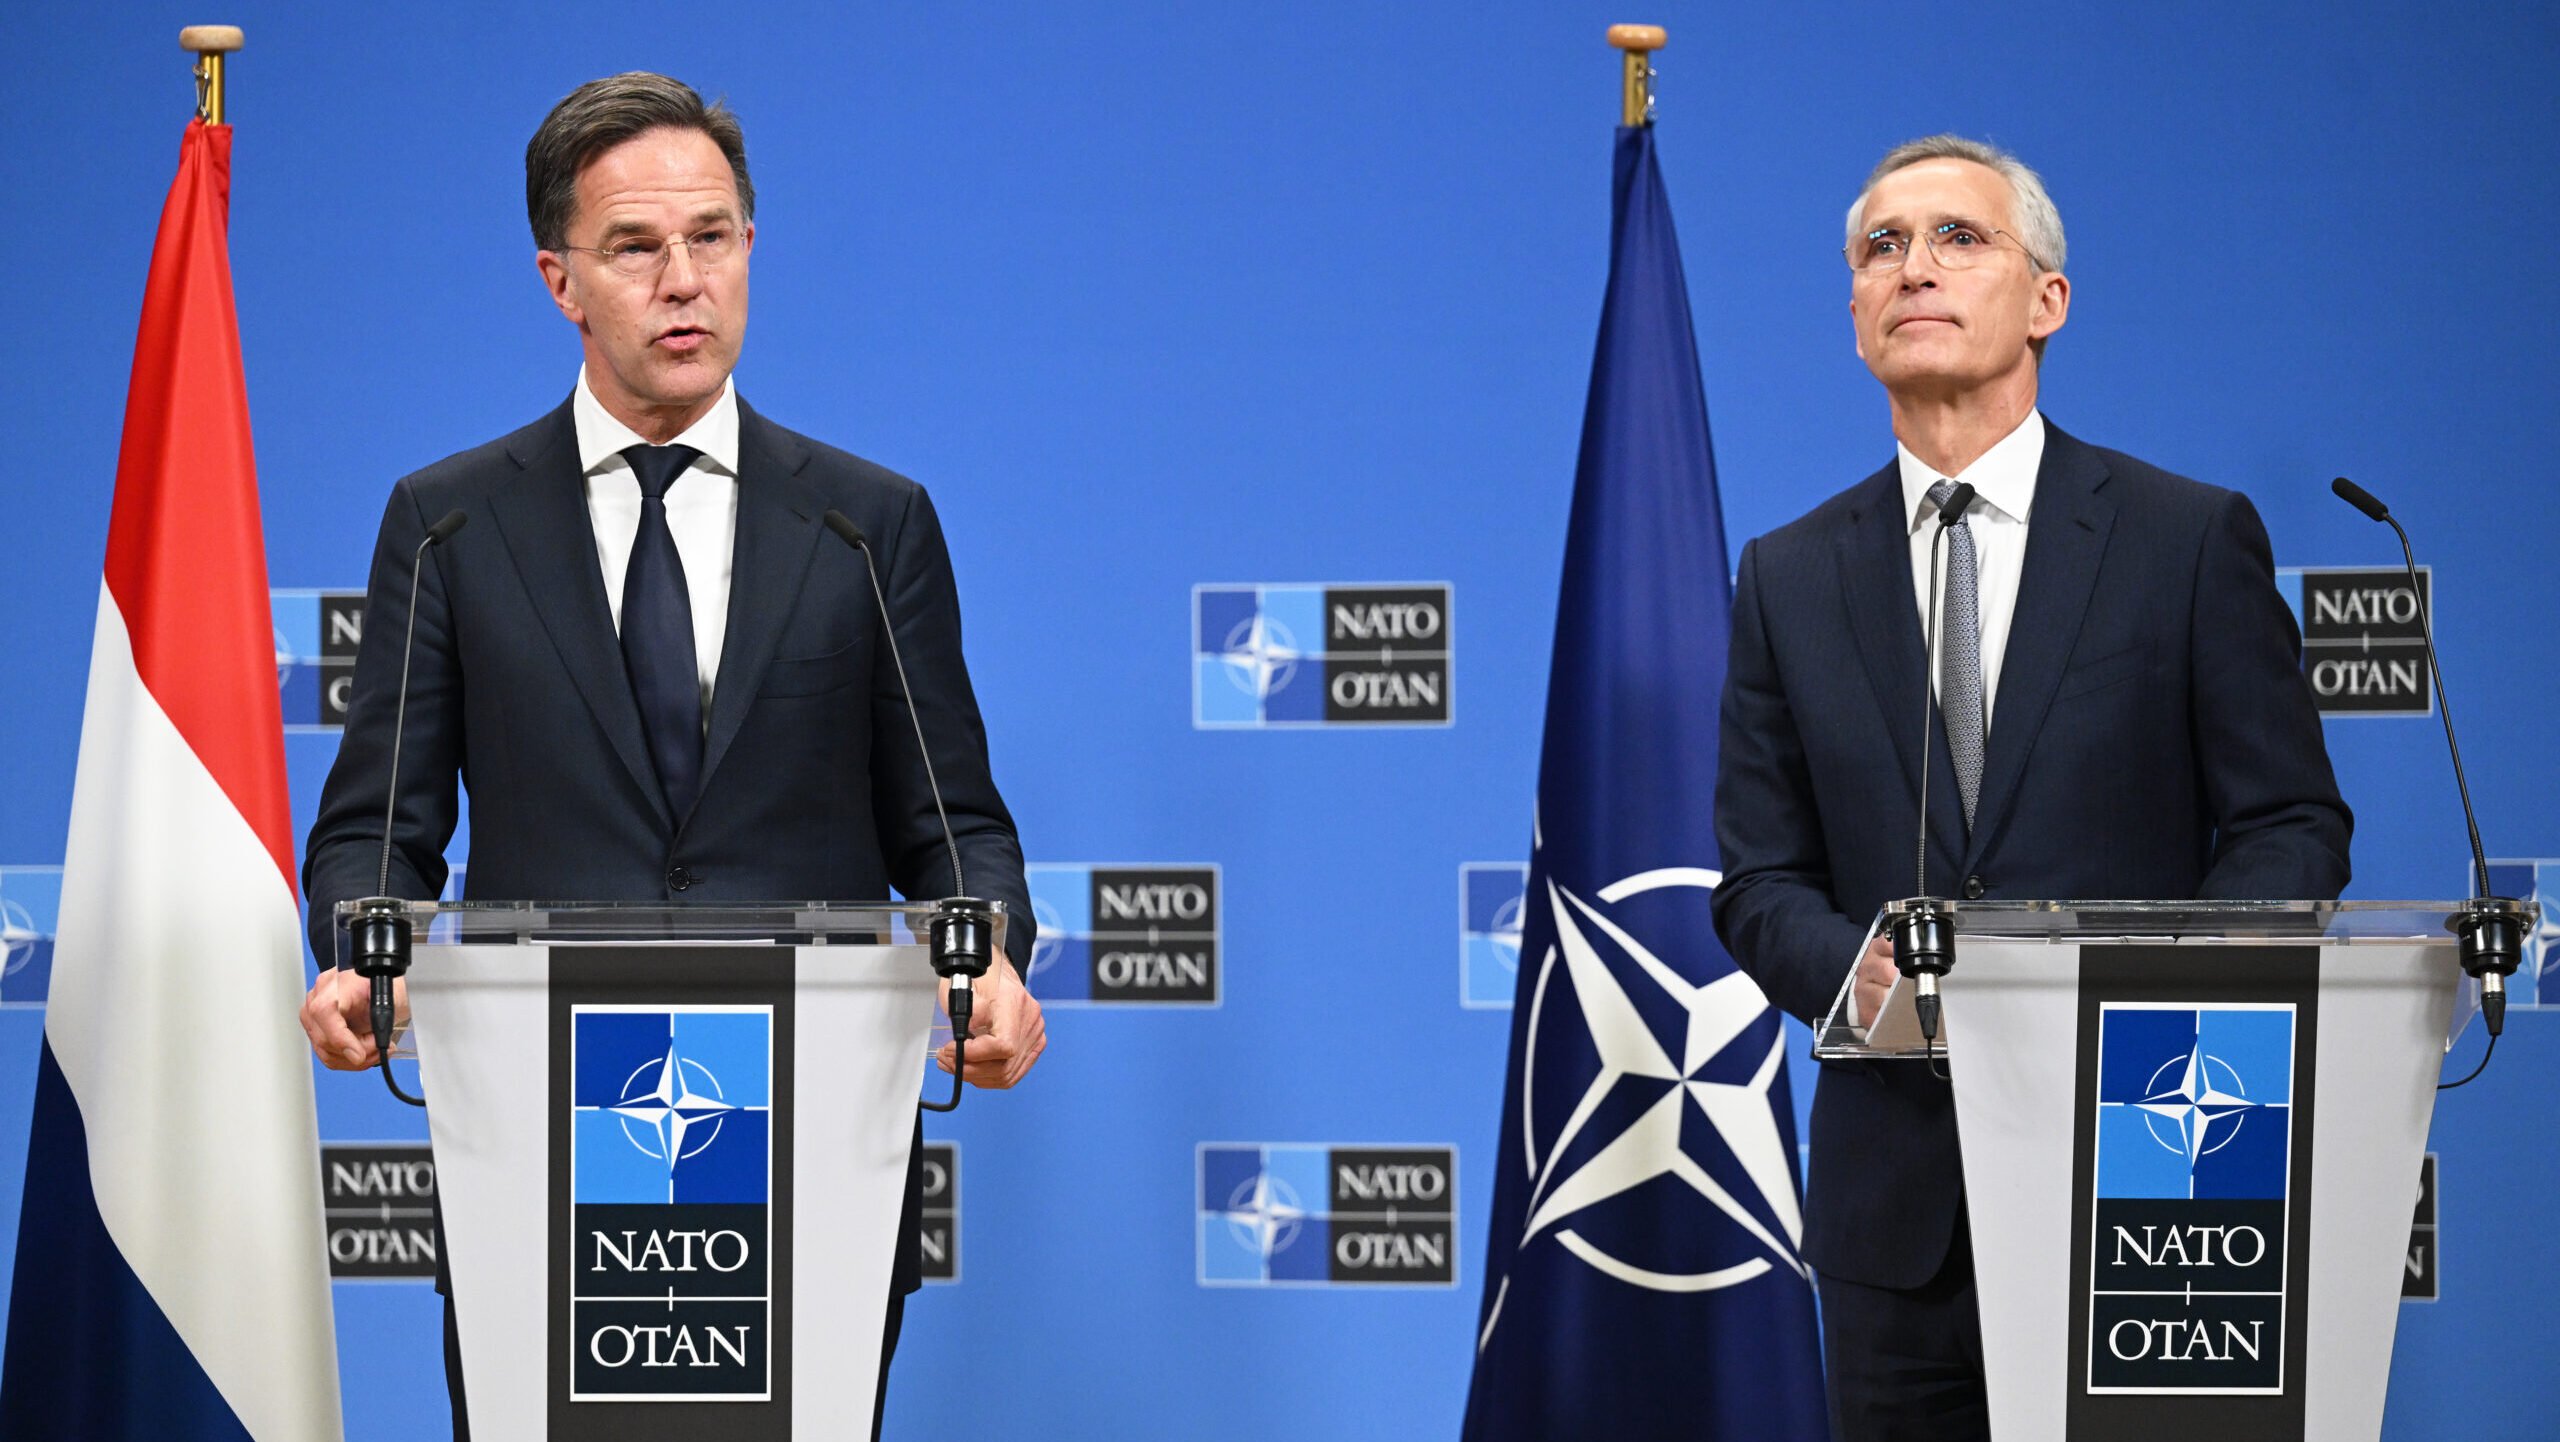 When NATO comes to DC, expect Mark Rutte to stay in the background: Analysts